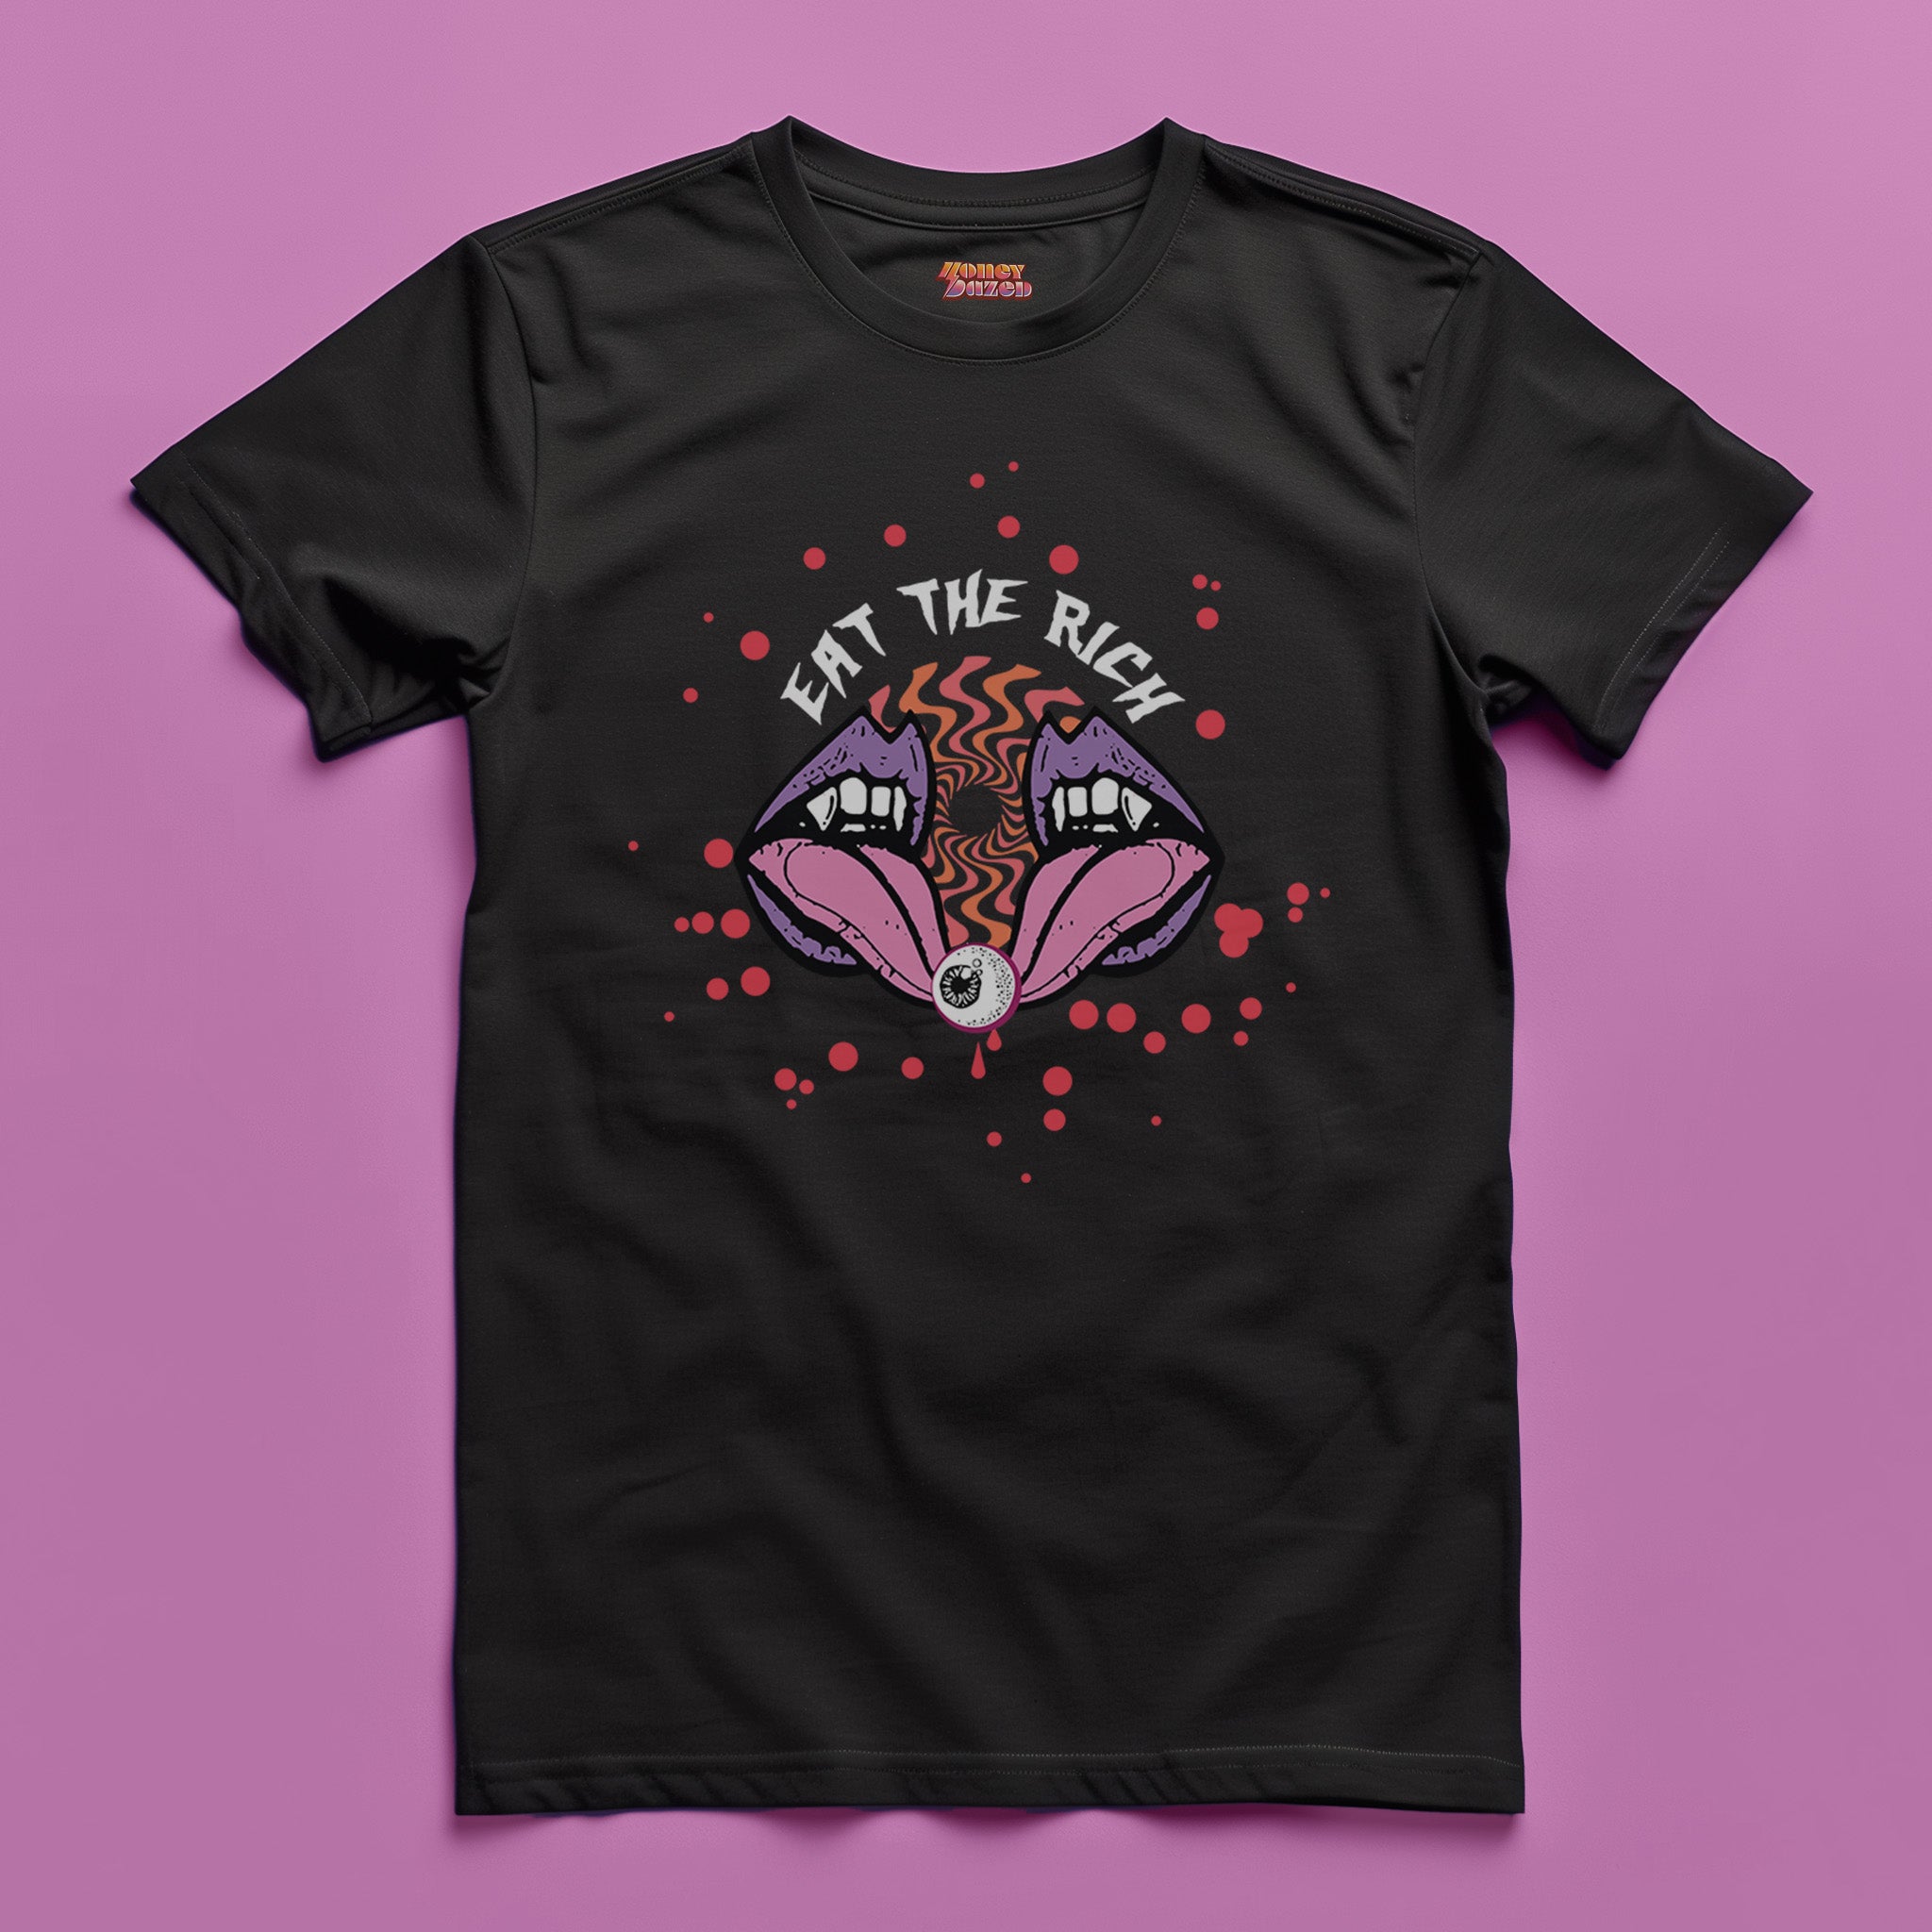 White t-shirt featuring a surreal, psychedelic design centered on the chest. An open mouth with sharp vampire-like teeth and pink tongue dominates the image. Between the teeth, a hypnotic swirling pattern in rainbow colors leads to a single eyeball on the tongue. 